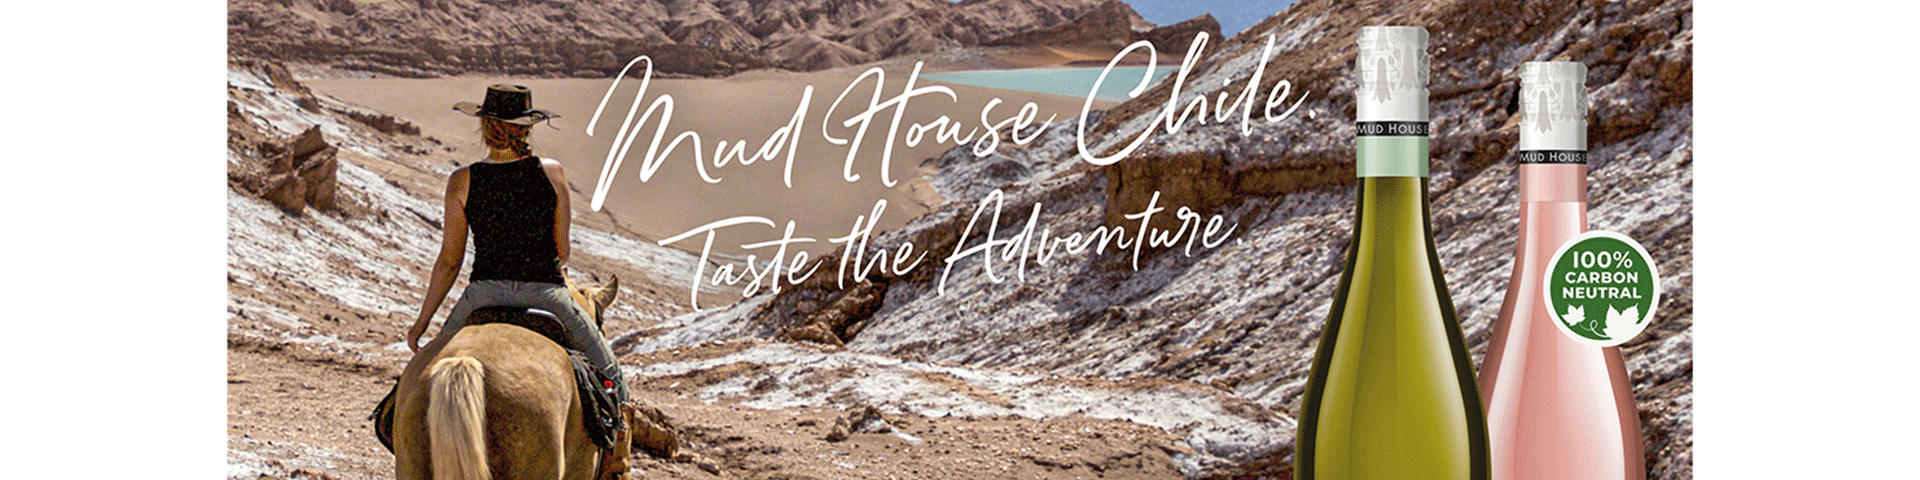 Mud House extends its ‘taste of adventure’ with two Chilean wines